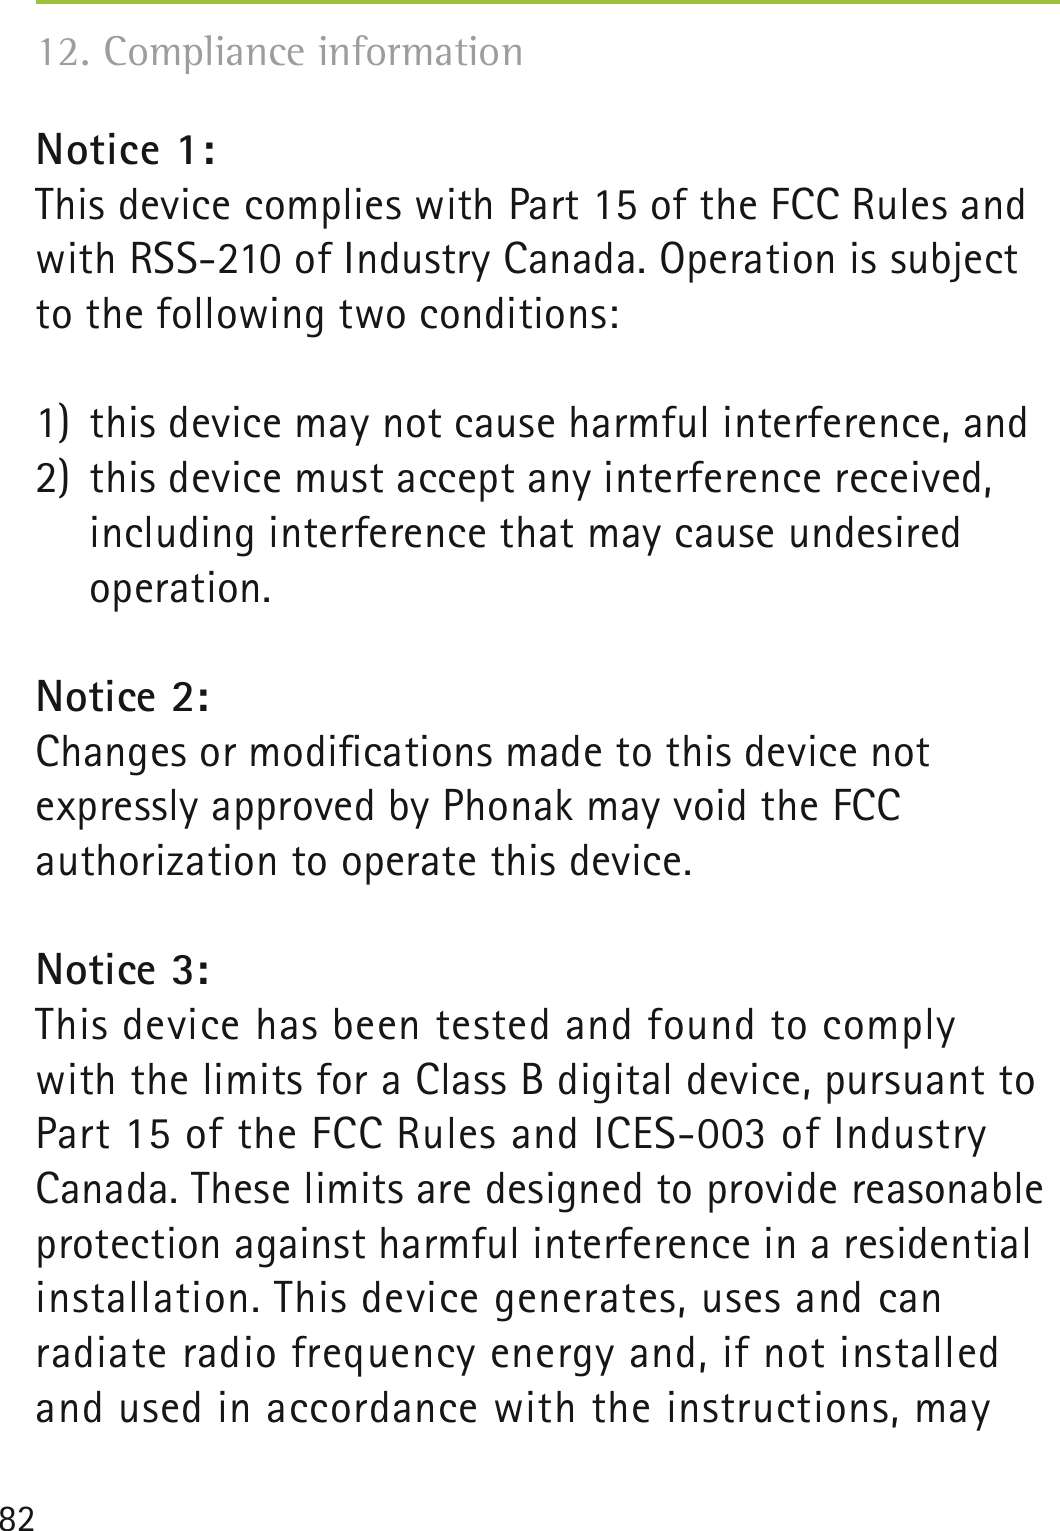 82Notice 1:This device complies with Part 15 of the FCC Rules and with RSS-210 of Industry Canada. Operation is subject to the following two conditions: 1)  this device may not cause harmful interference, and2)  this device must accept any interference received,   including interference that may cause undesired   operation.Notice 2:Changes or modiﬁcations made to this device not  expressly approved by Phonak may void the FCC  authorization to operate this device.Notice 3:This device has been tested and found to comply  with the limits for a Class B digital device, pursuant to  Part 15 of the FCC Rules and ICES-003 of Industry Canada. These limits are designed to provide reasonable protection against harmful interference in a residential  installation. This device generates, uses and can radiate radio frequency energy and, if not installed and used in accordance with the instructions, may 12. Compliance information 